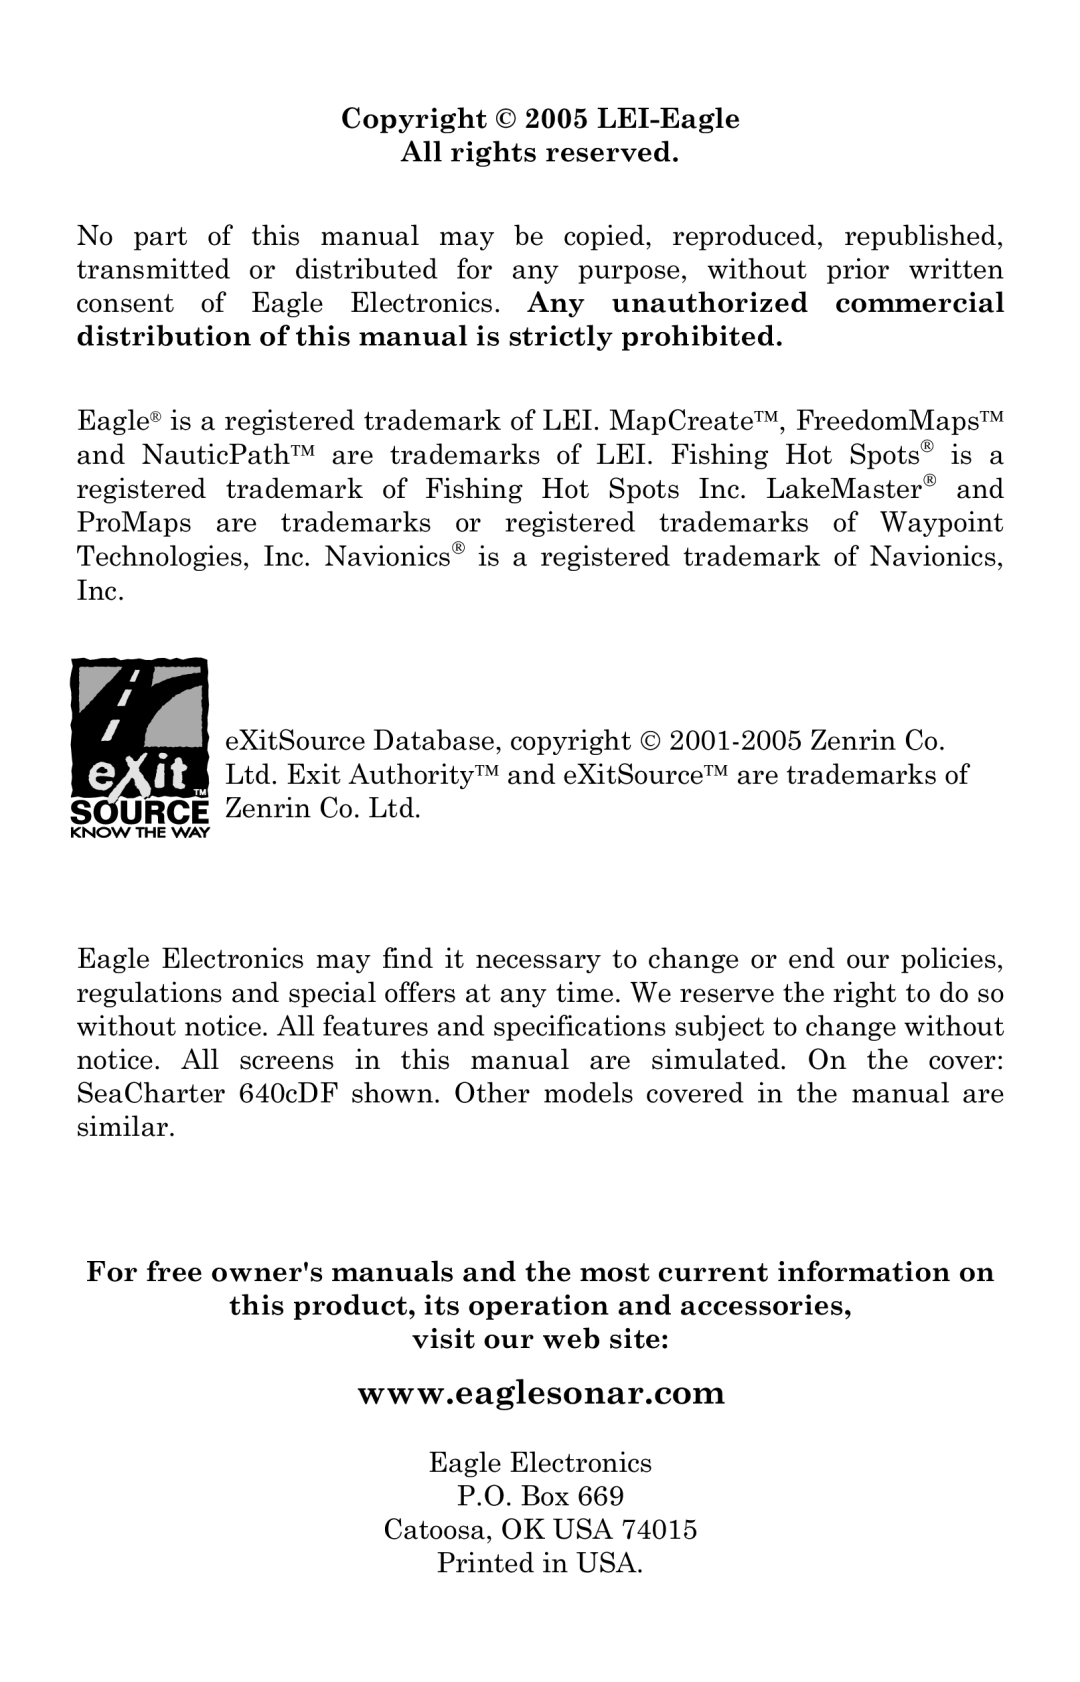 Eagle Electronics 640C, 640cDF manual Copyright 2005 LEI-Eagle All rights reserved 